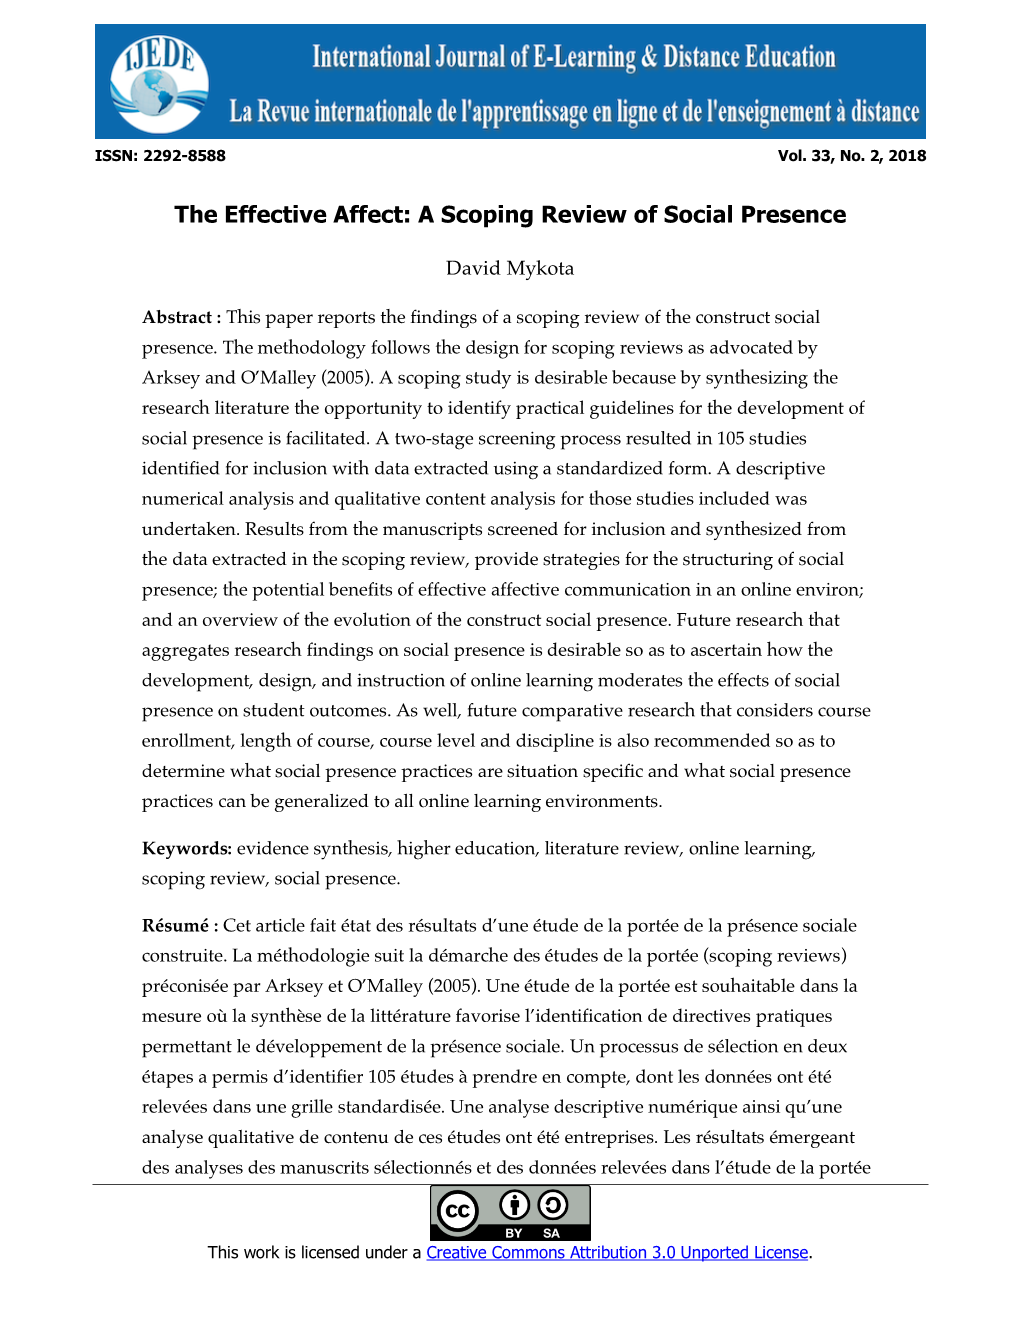 The Effective Affect: a Scoping Review of Social Presence